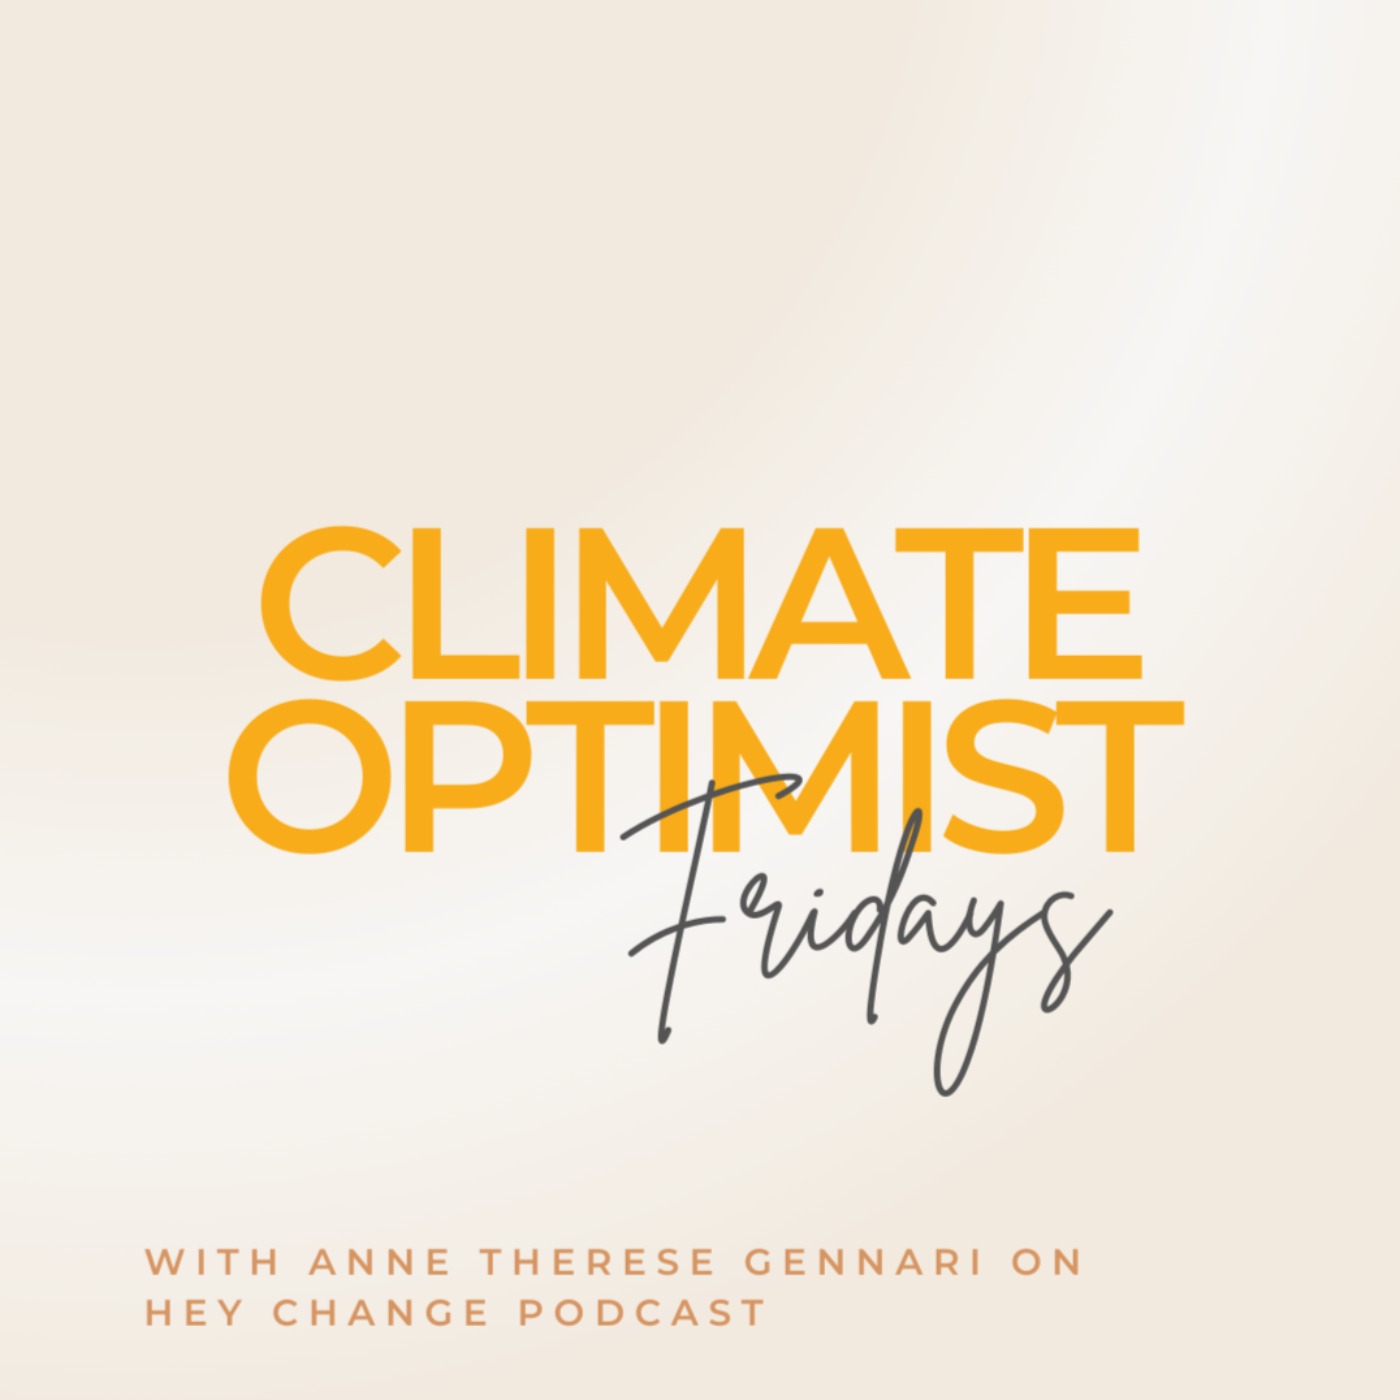 Climate Optimist Fridays  - Why are we here?